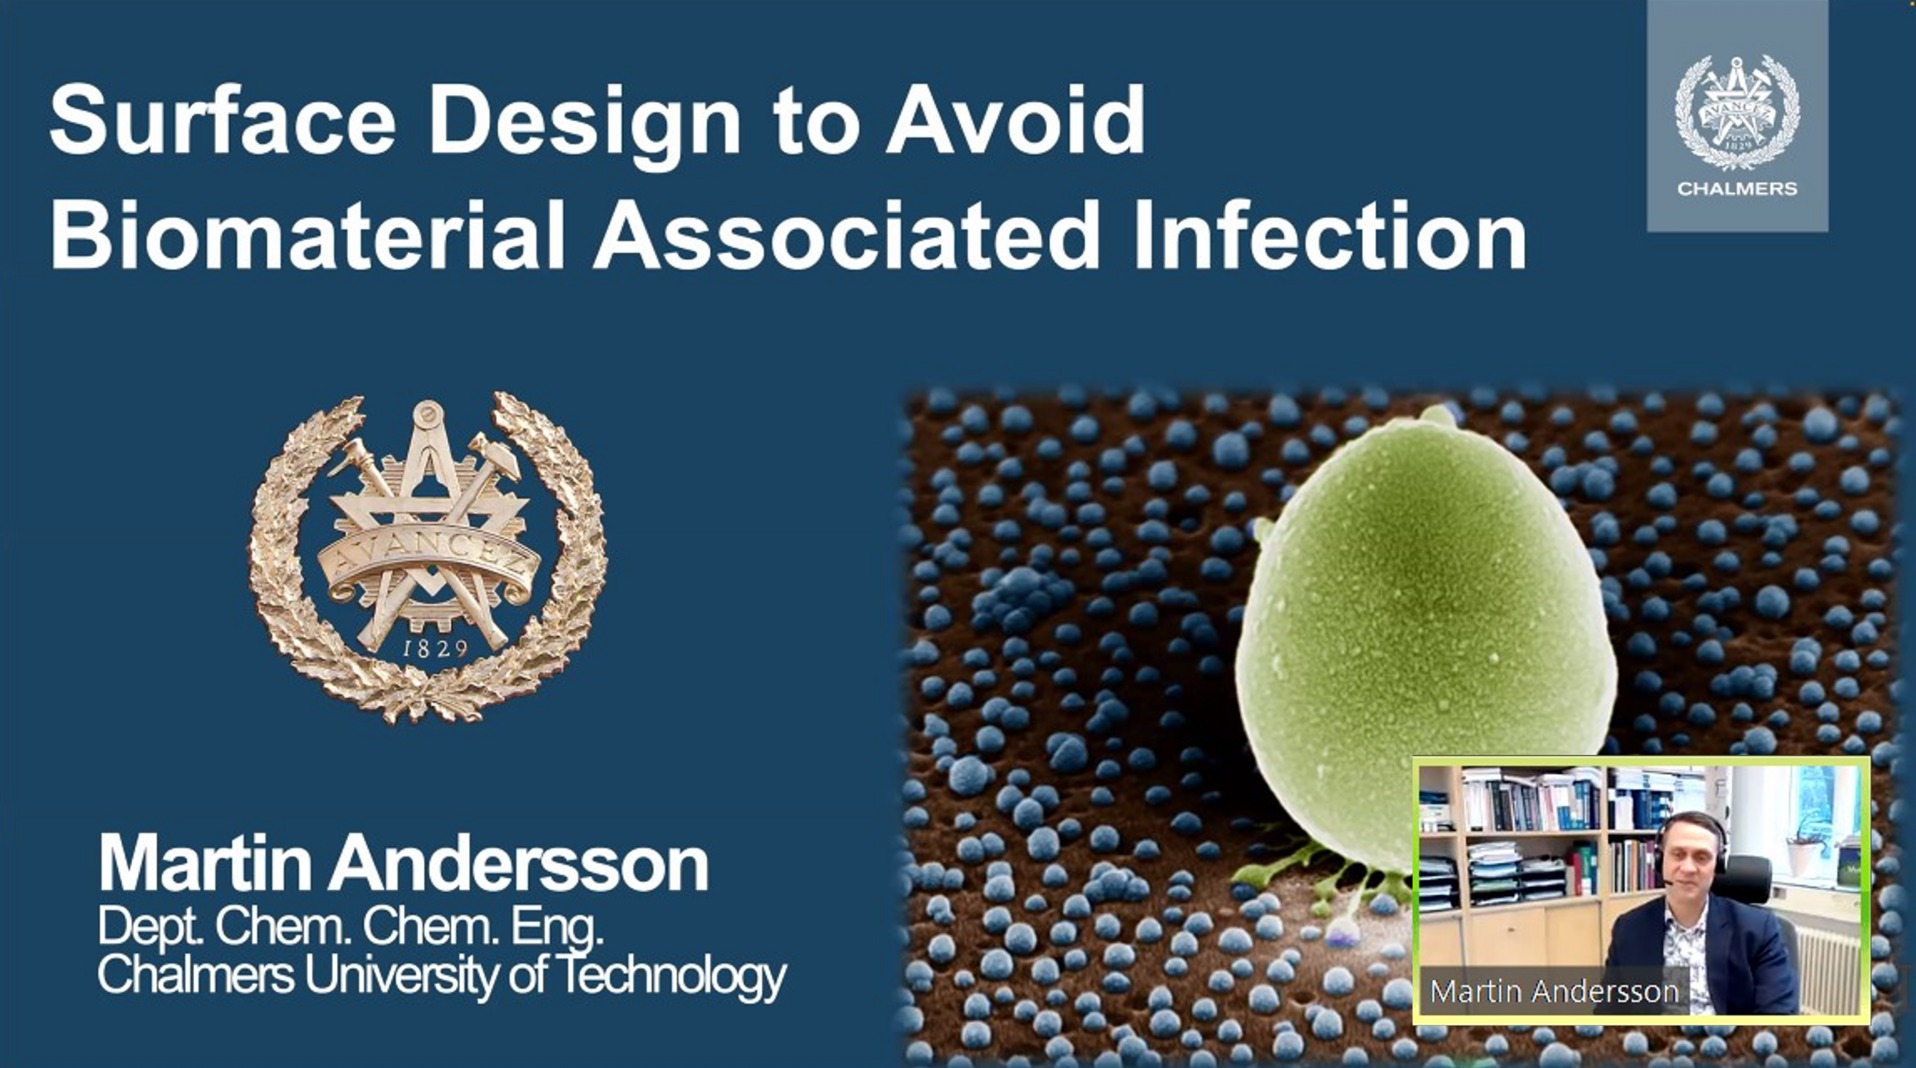 Title slide from the BIOREMIA 4th e-seminar given by Prof. Andersson (Chalmers University of Technology, Sweden)